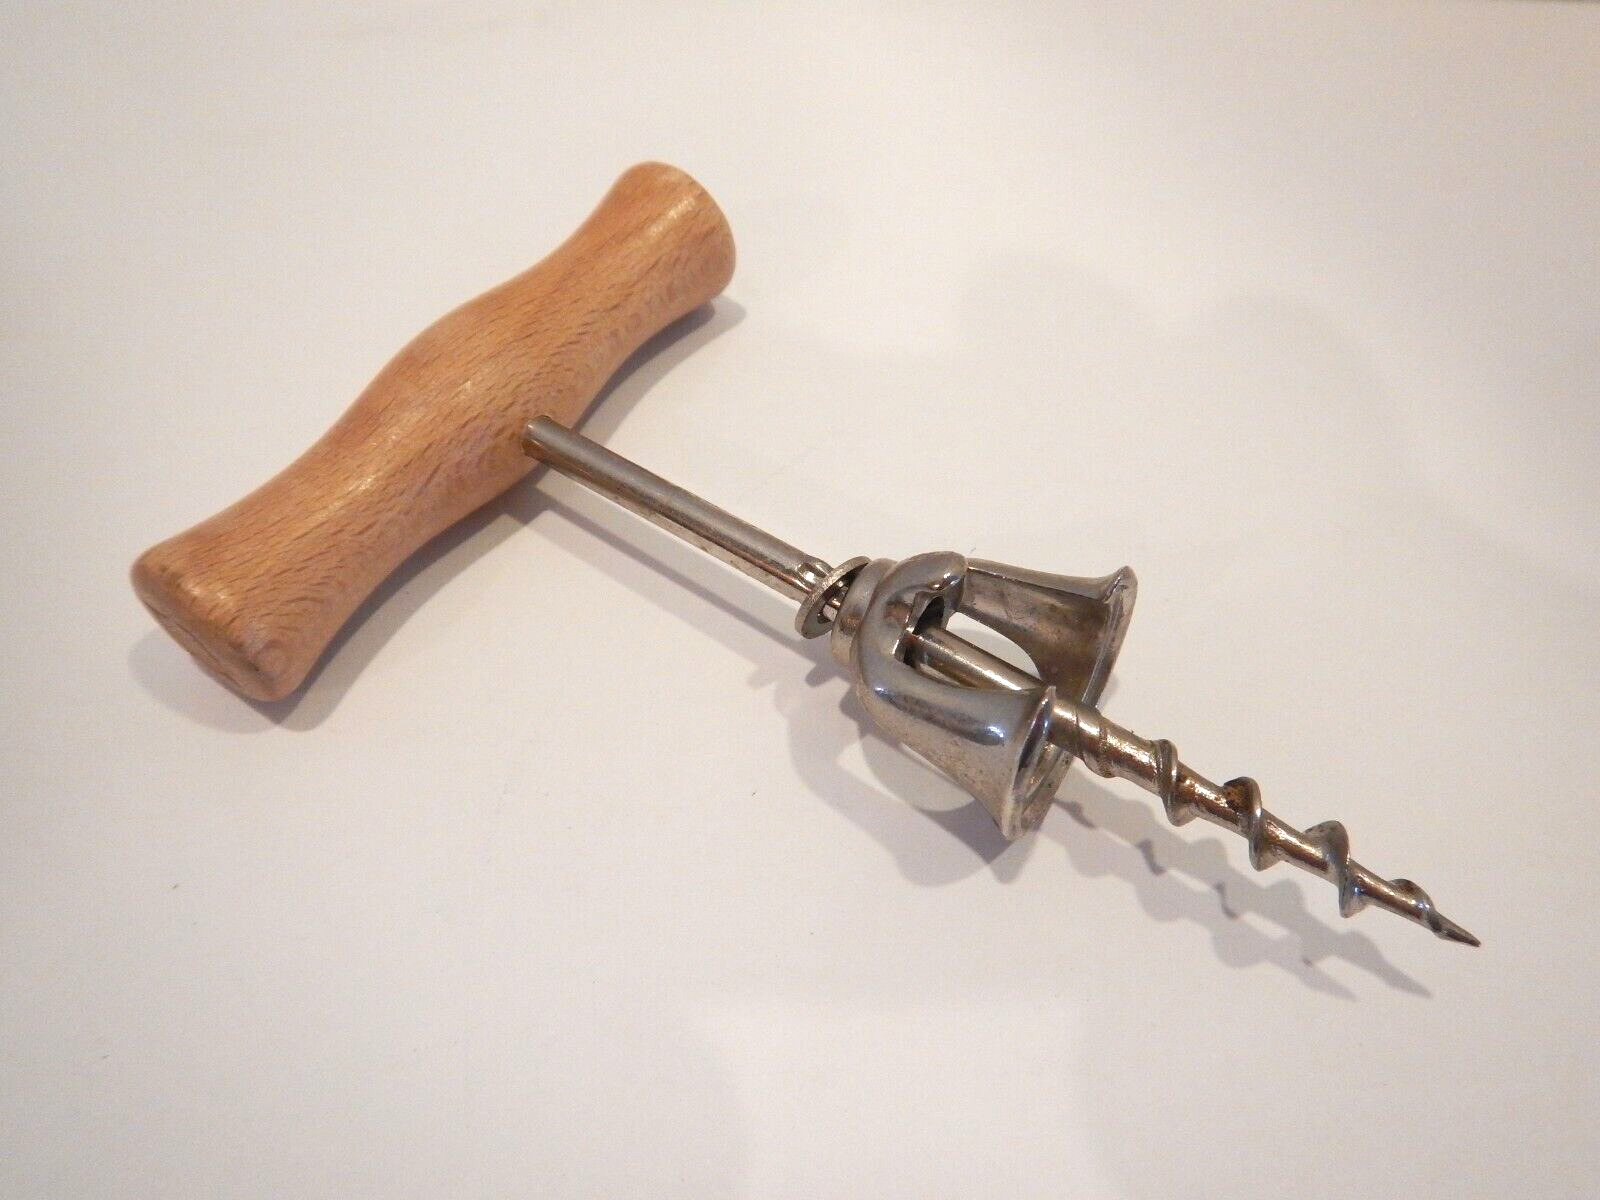 Vintage Corkscrew Bell Style Wood Handle Made In Italy Wine Bottle Opener